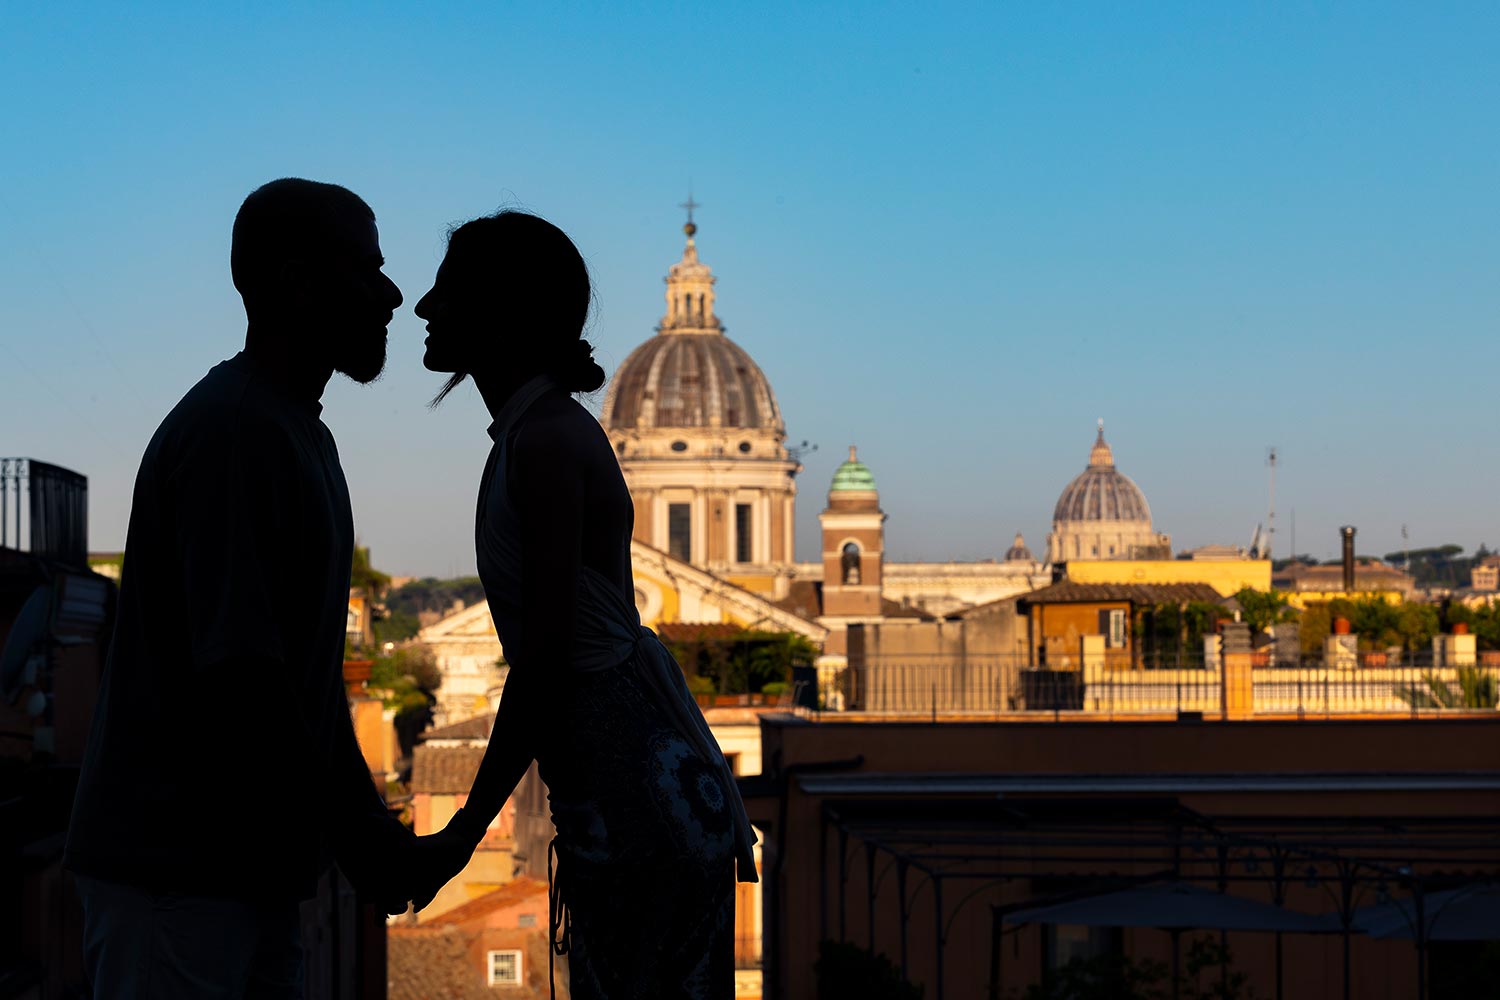 Silhouette image taken in Rome Italy overlooking the roman skyline from an above hill 